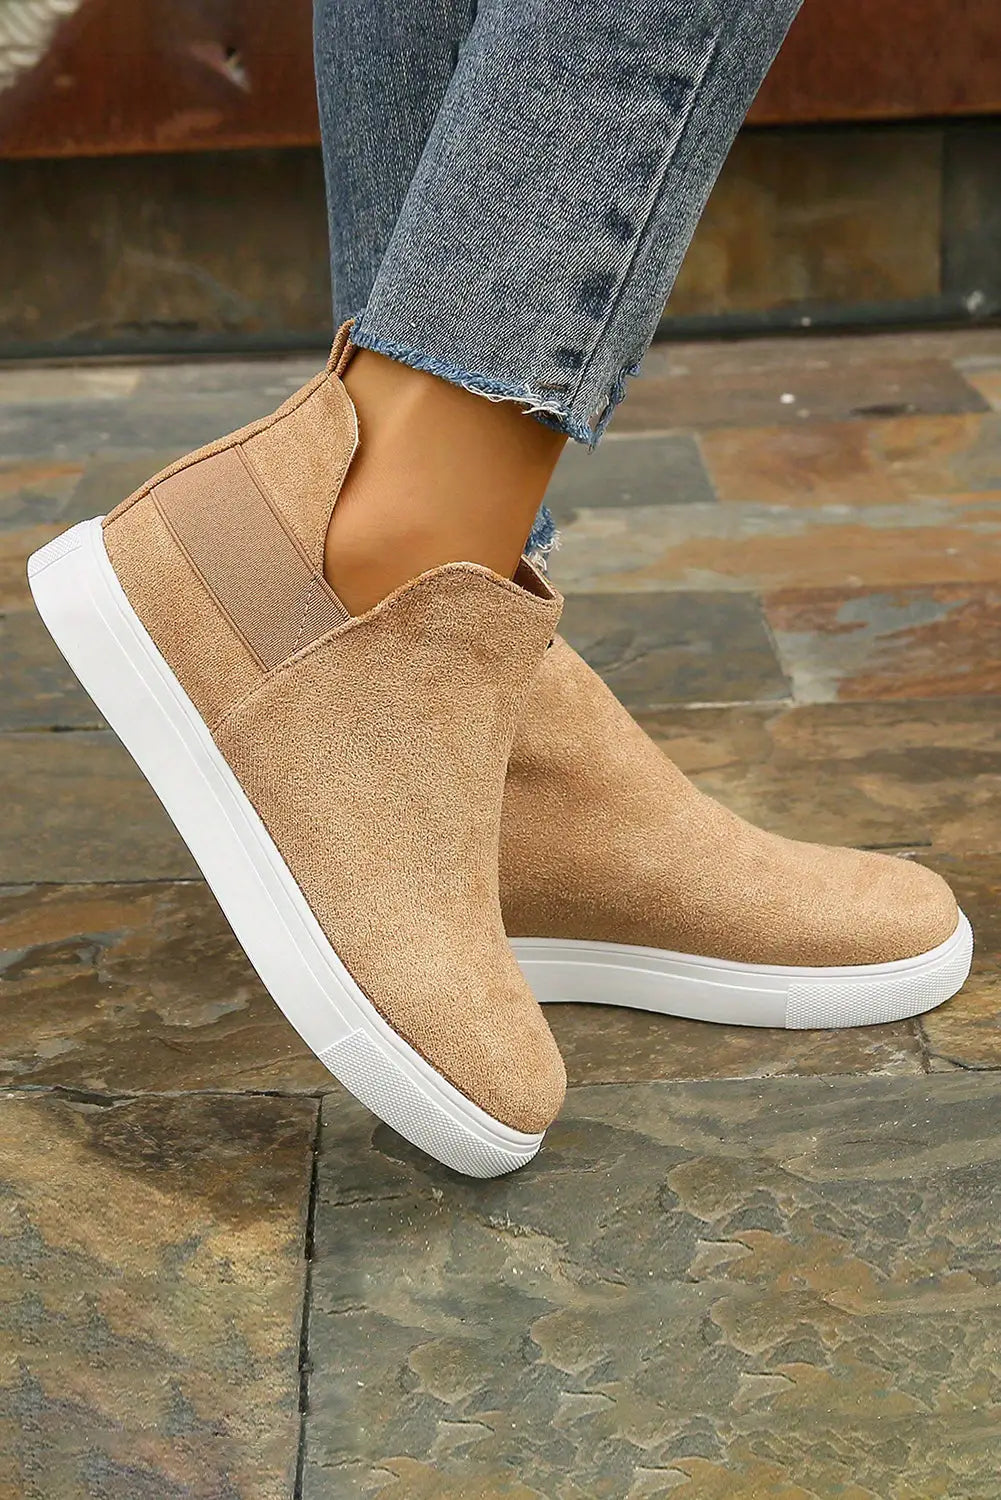 Camel suede slip-on casual boots - shoes & bags